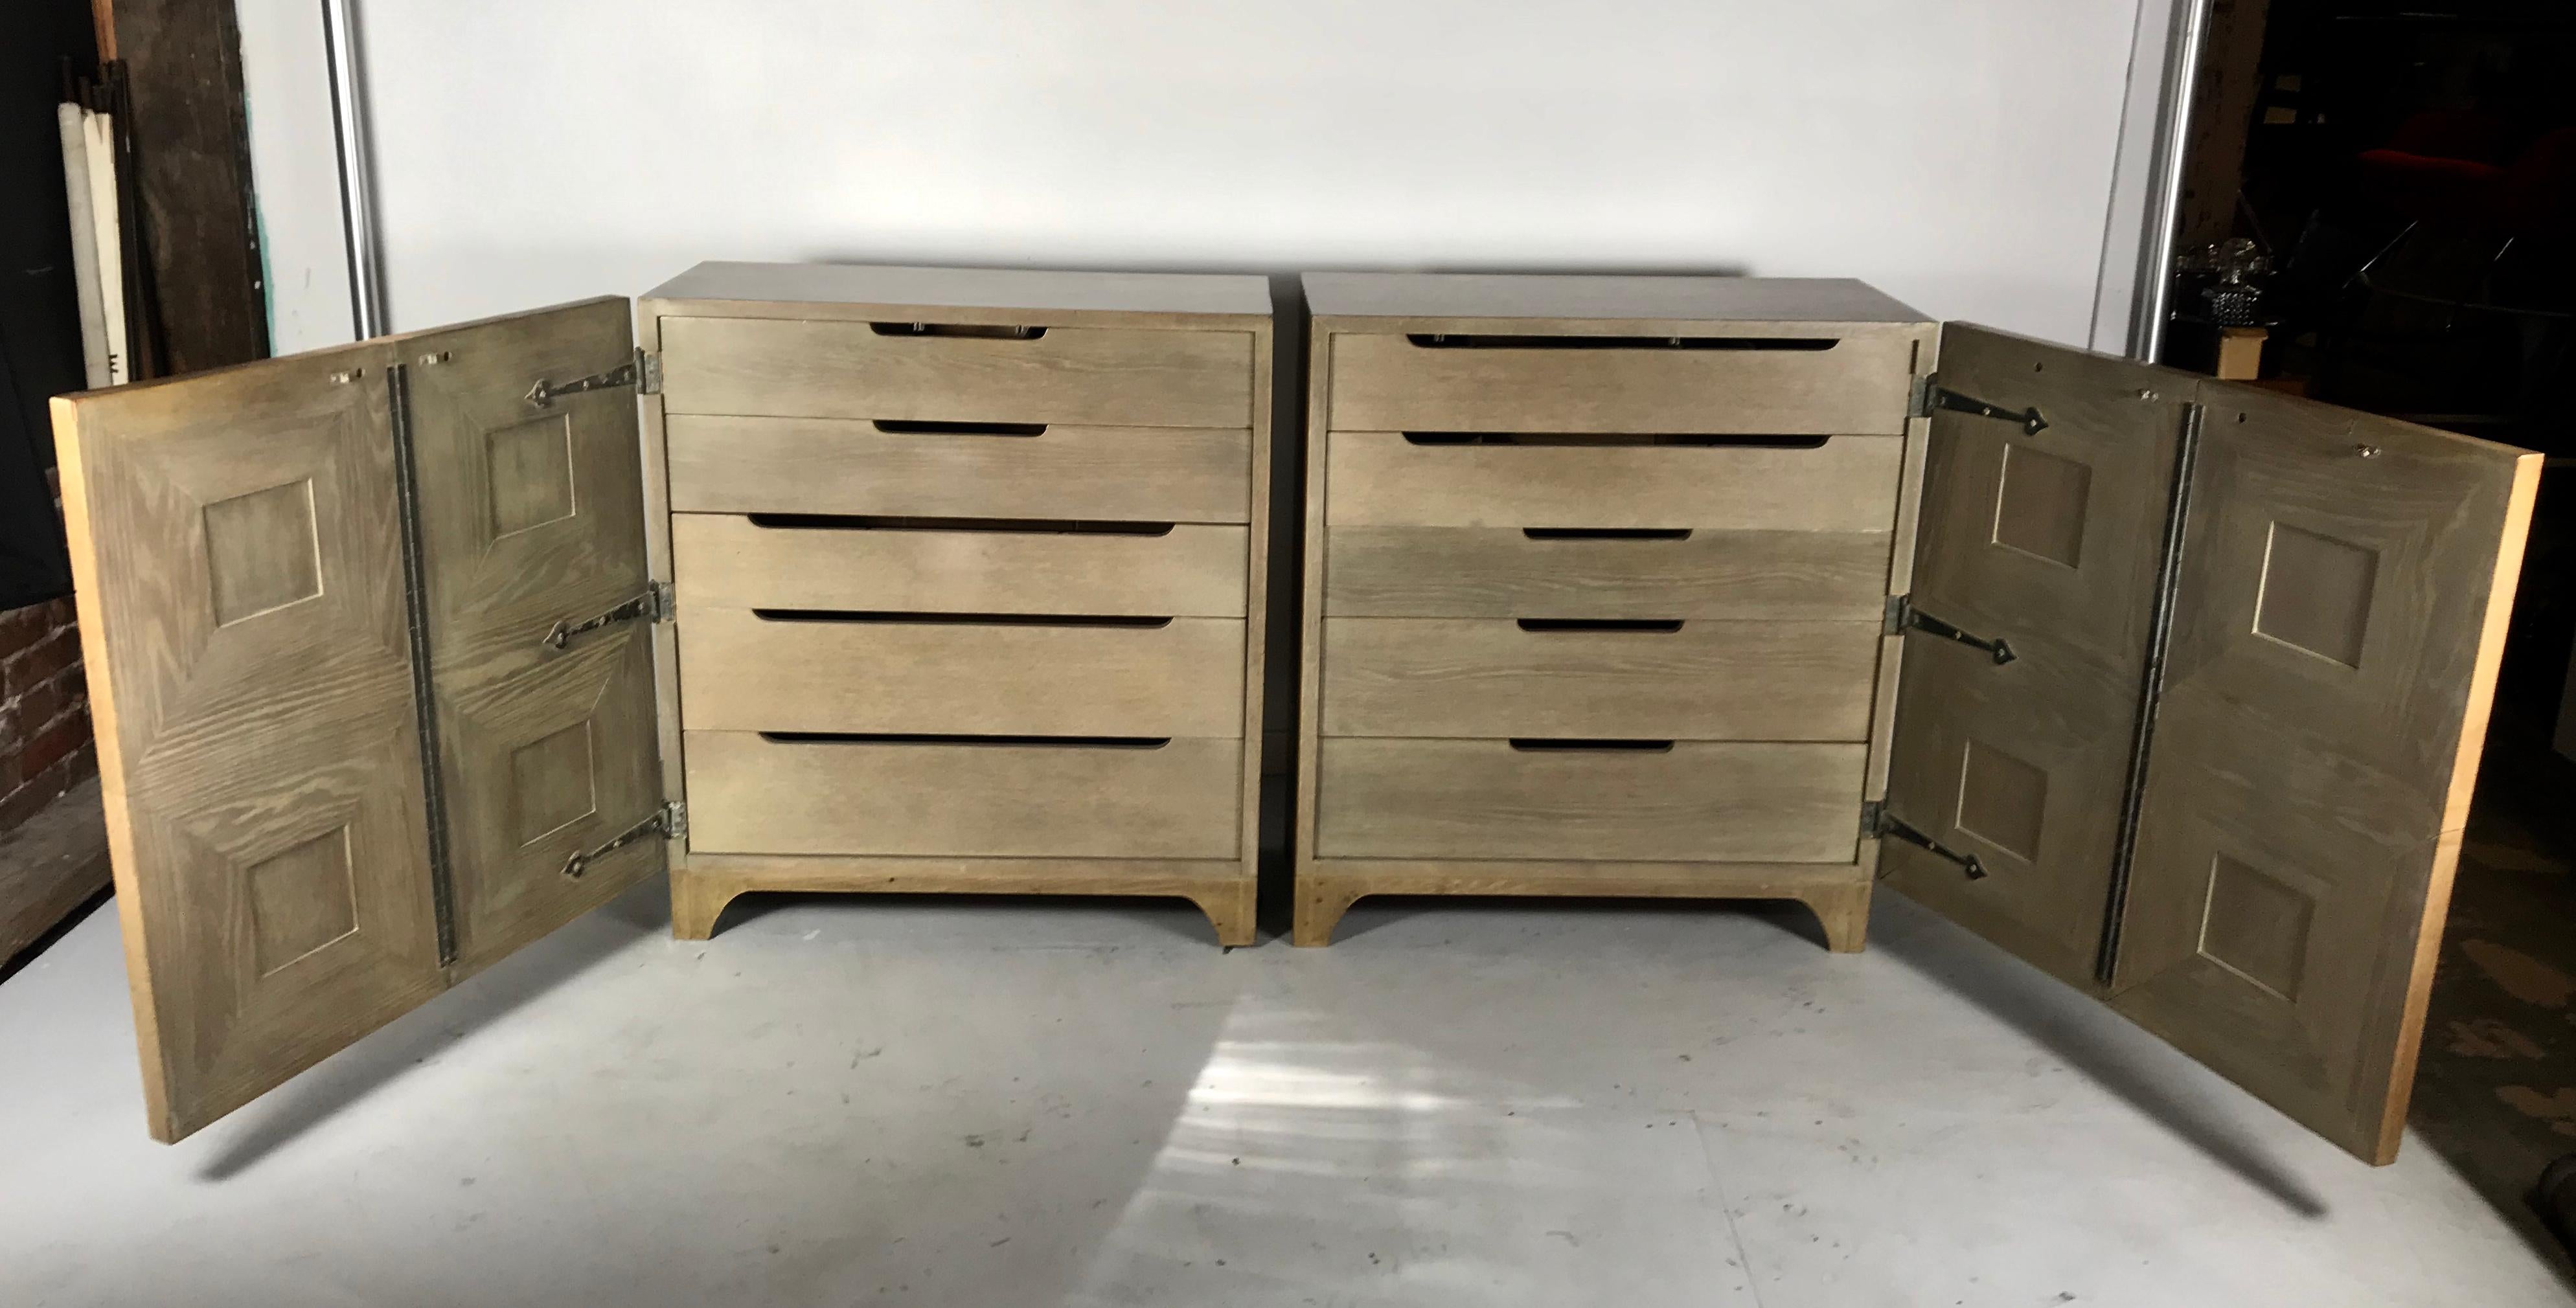 Stunning pair of Bi-fold panel front 5-drawer Cerused oak dressers by Romweber Furniture Co. Regency modernist design. Superior quality and construction, amazing design and proportions. Retains original color, surface, patina. Five generous divided